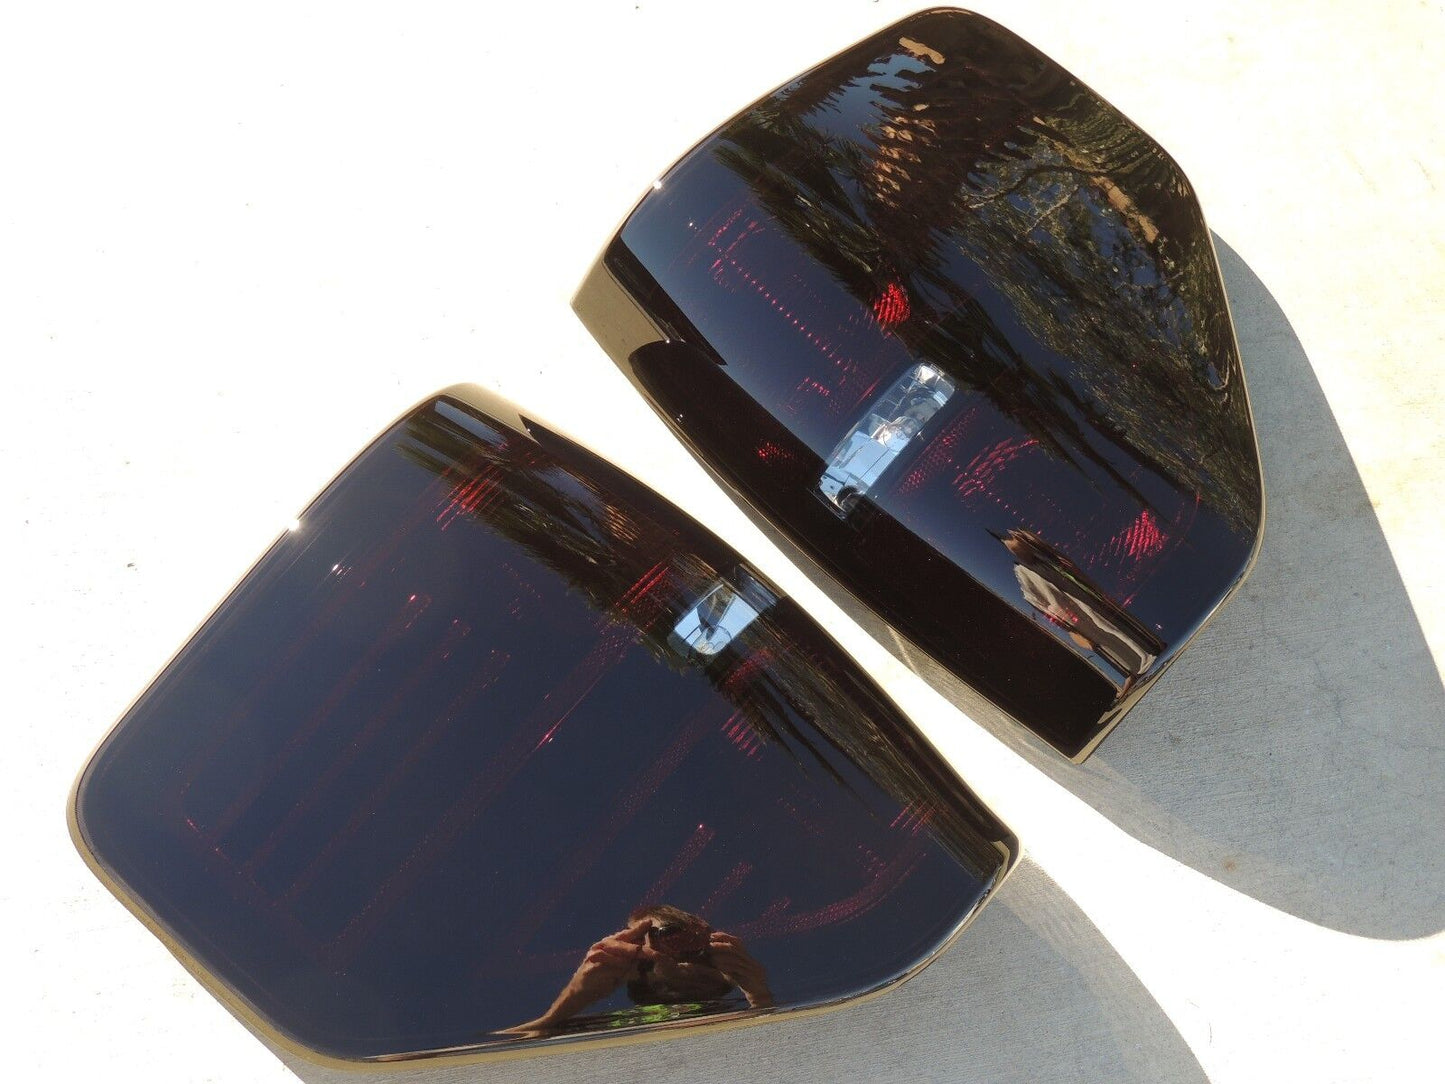 2009-2014 Ford F150 Smoked Tail Lights (Reverse Clear)